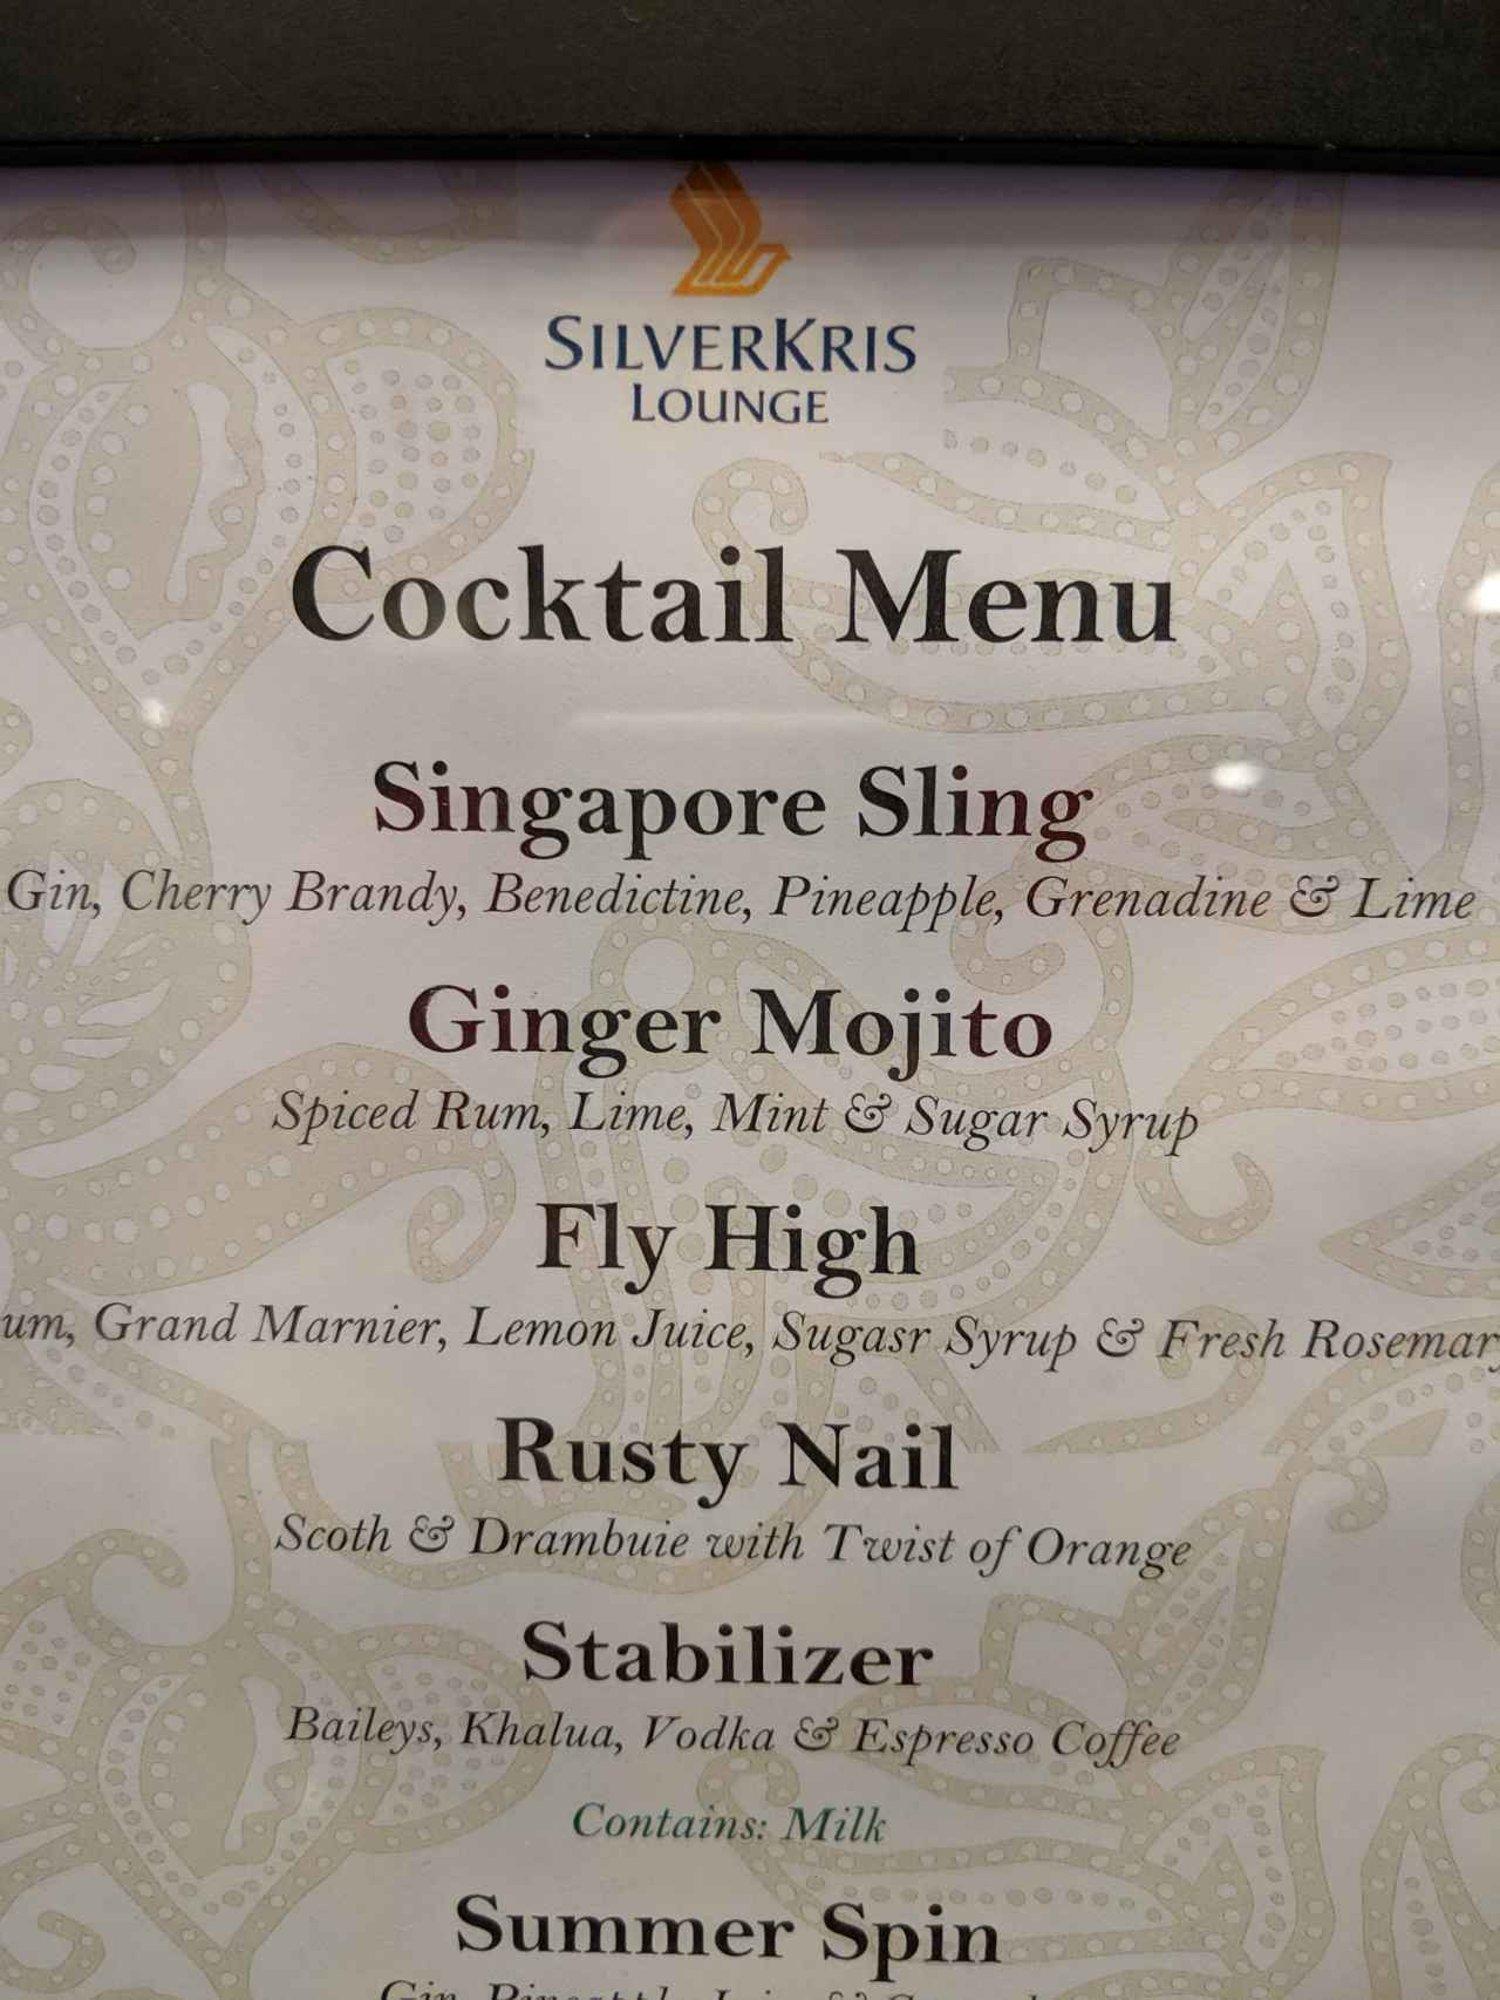 Singapore Airlines SilverKris Lounge image 35 of 36